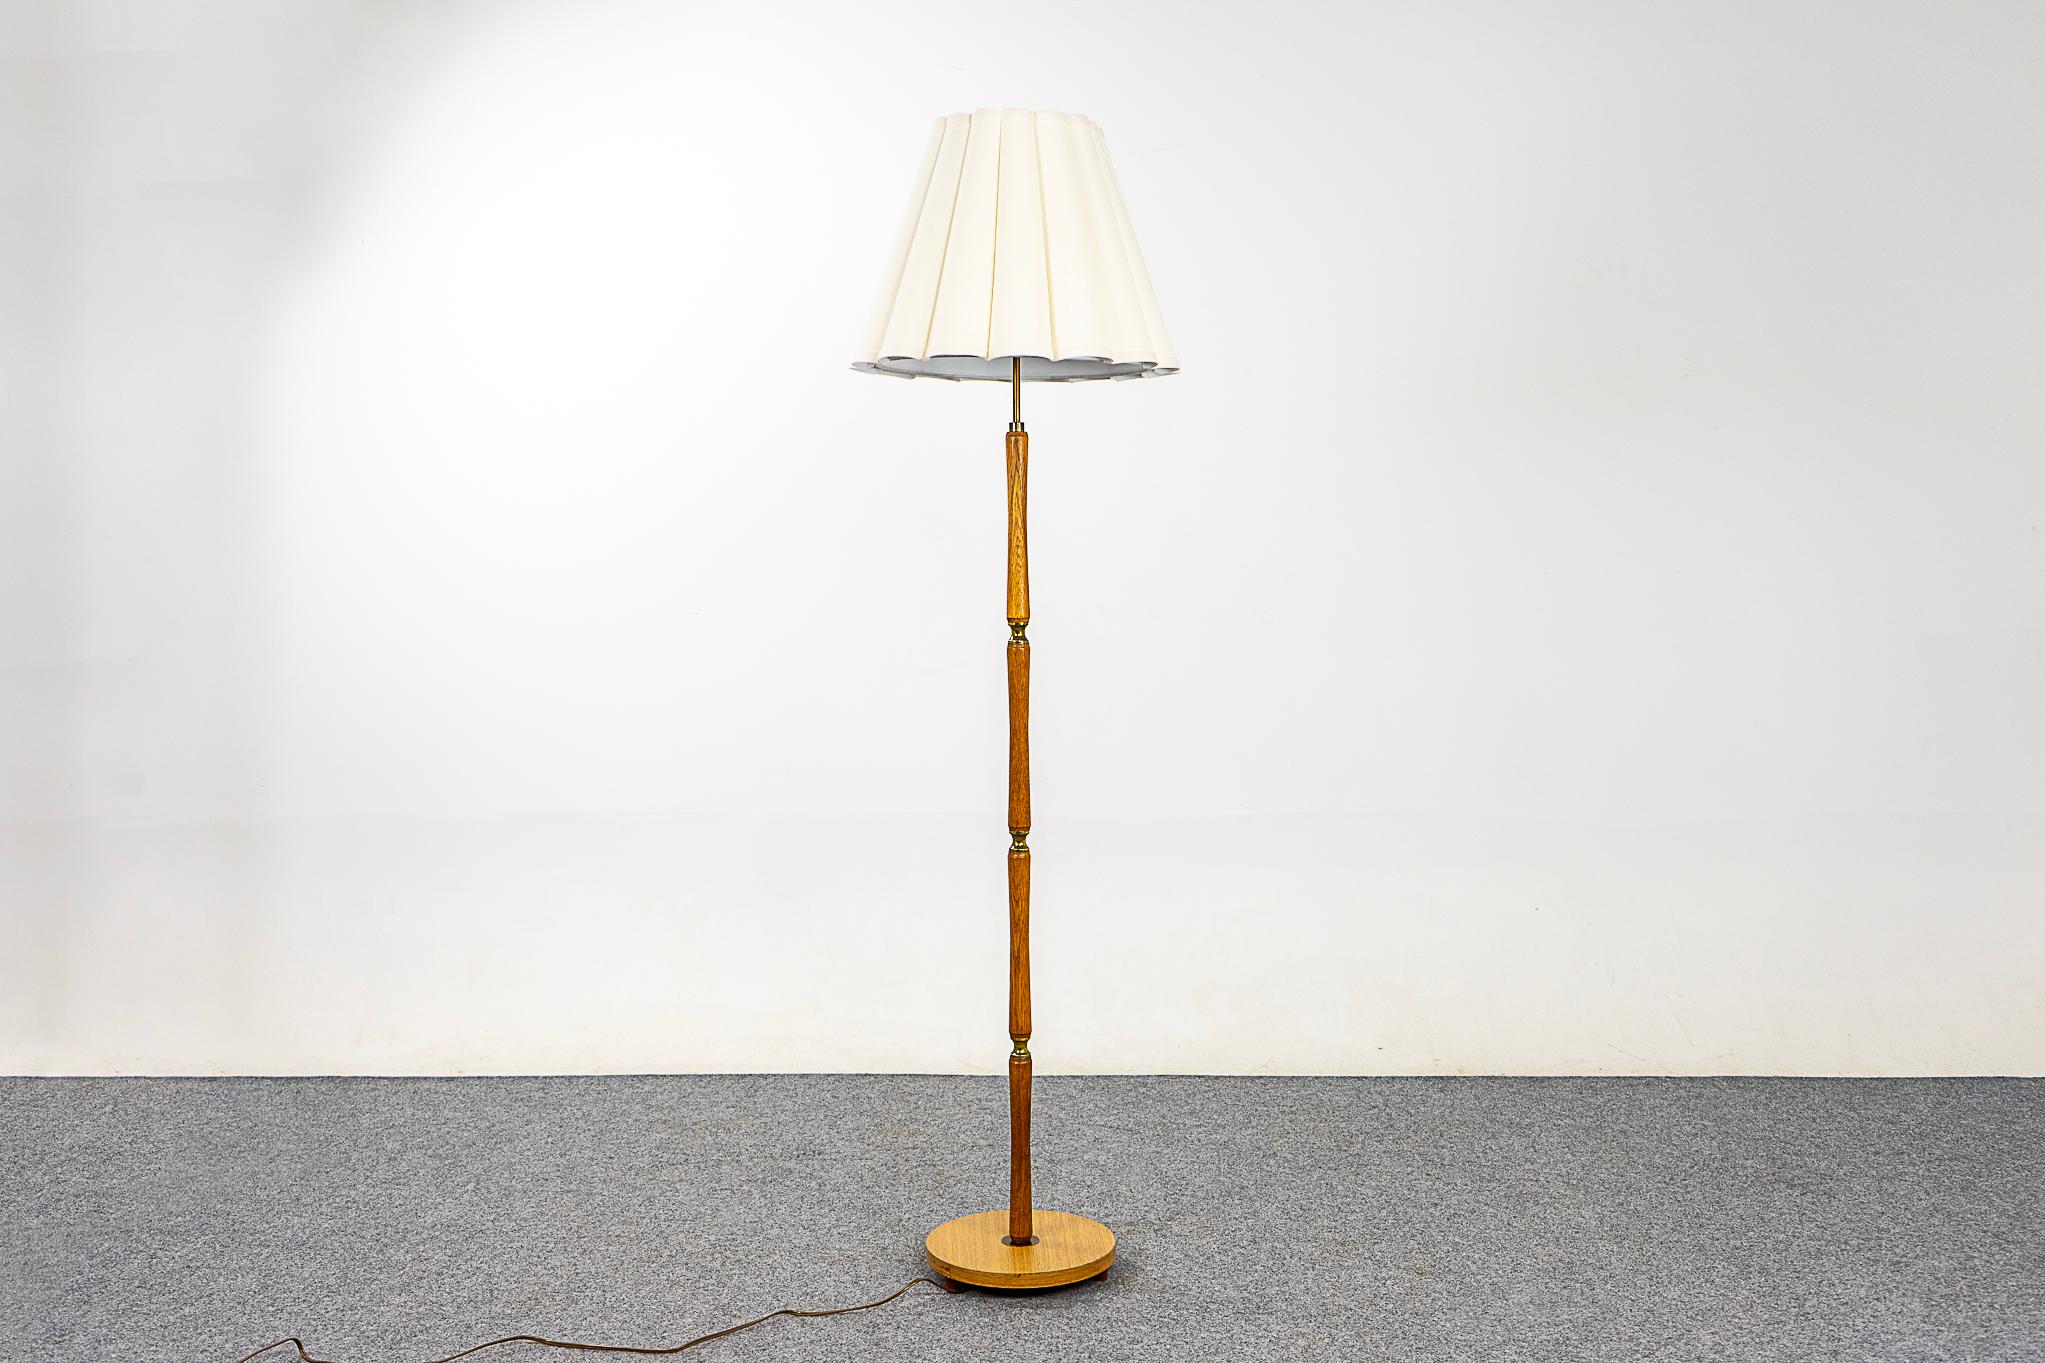 Teak Danish mid-century floor lamp, circa 1960's. Sold oak pole with veneer base and metal accents. Stunning custom scalloped fabric shade. New tri-light socket, adjust the brightness of the lamp to suit your mood. Rewired for 110V.

Please inquire